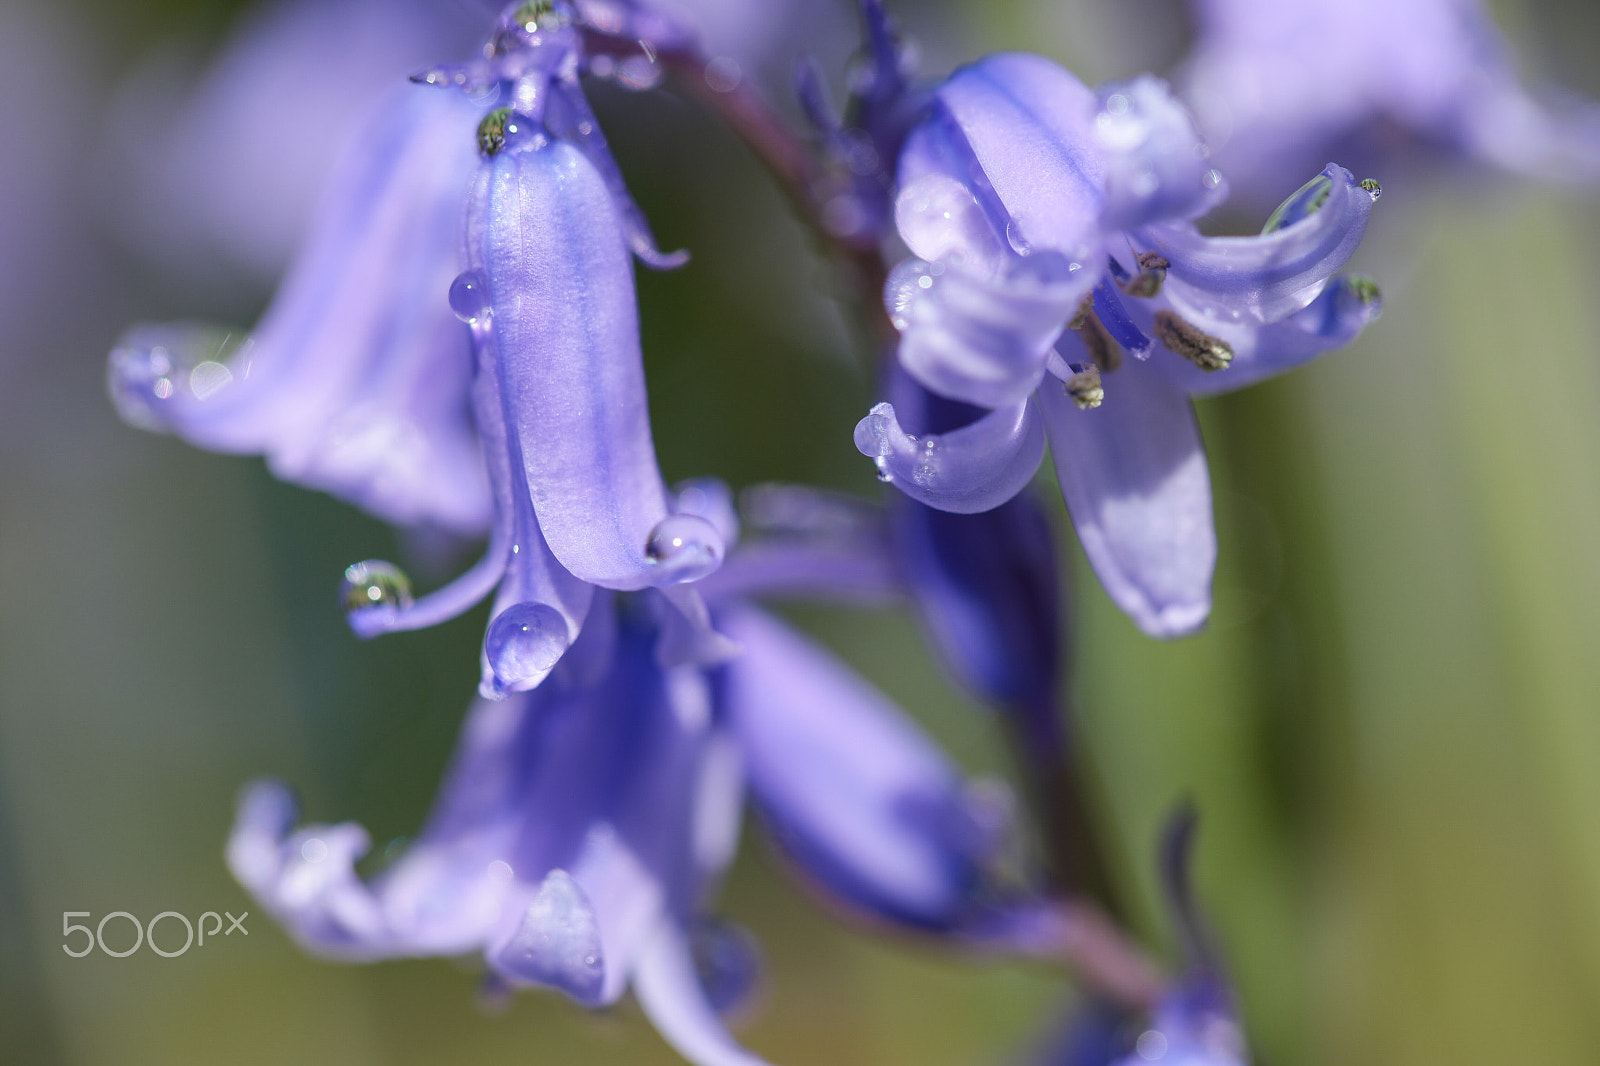 NX 60mm F2.8 Macro sample photo. Spring flowers in my garden photography